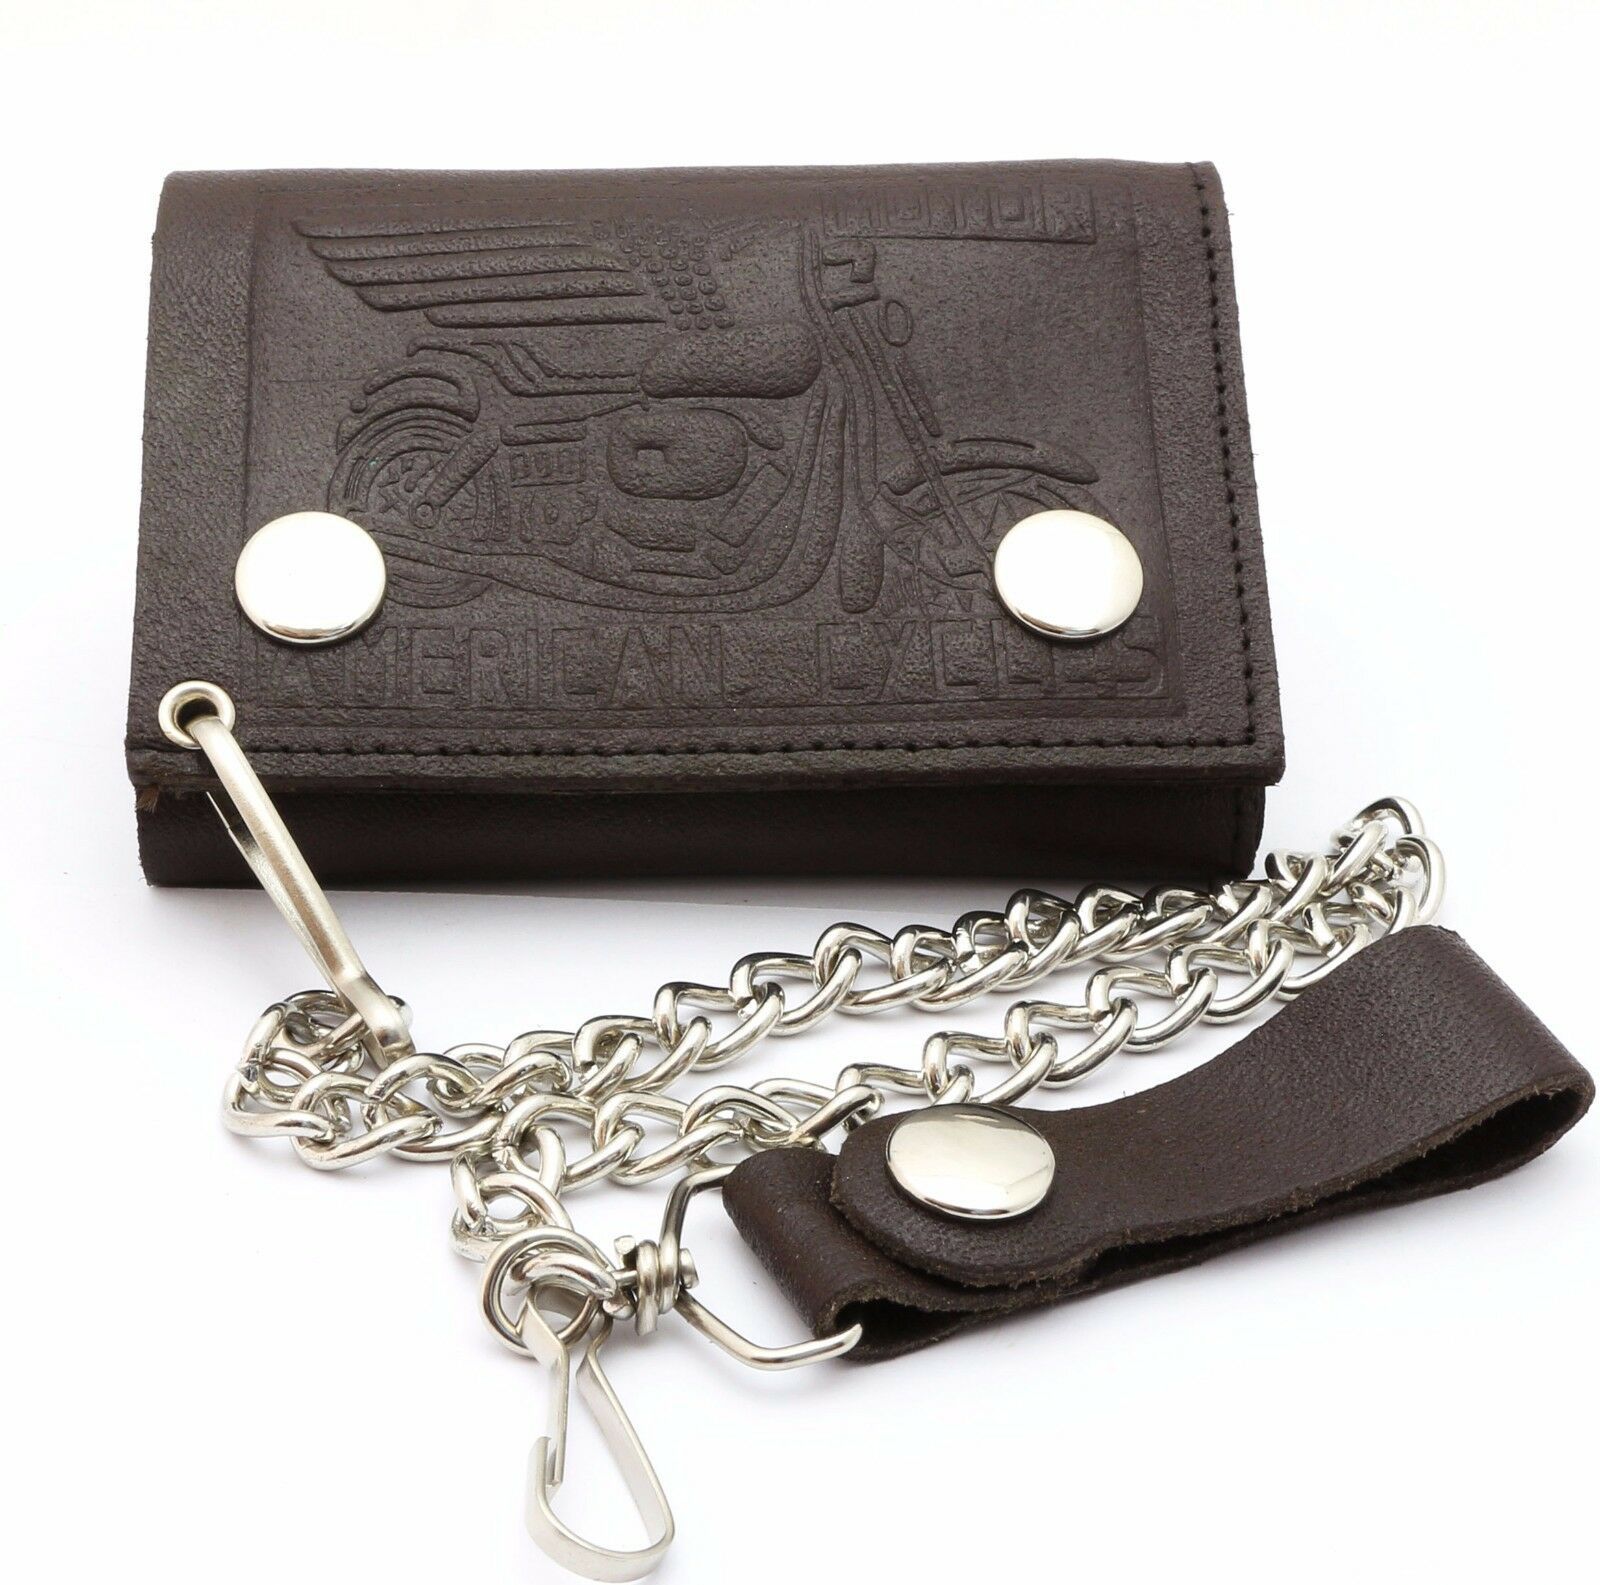 Trifold Brown Leather Biker Chain Wallet with Embossed Motorcycle Design - Wallets